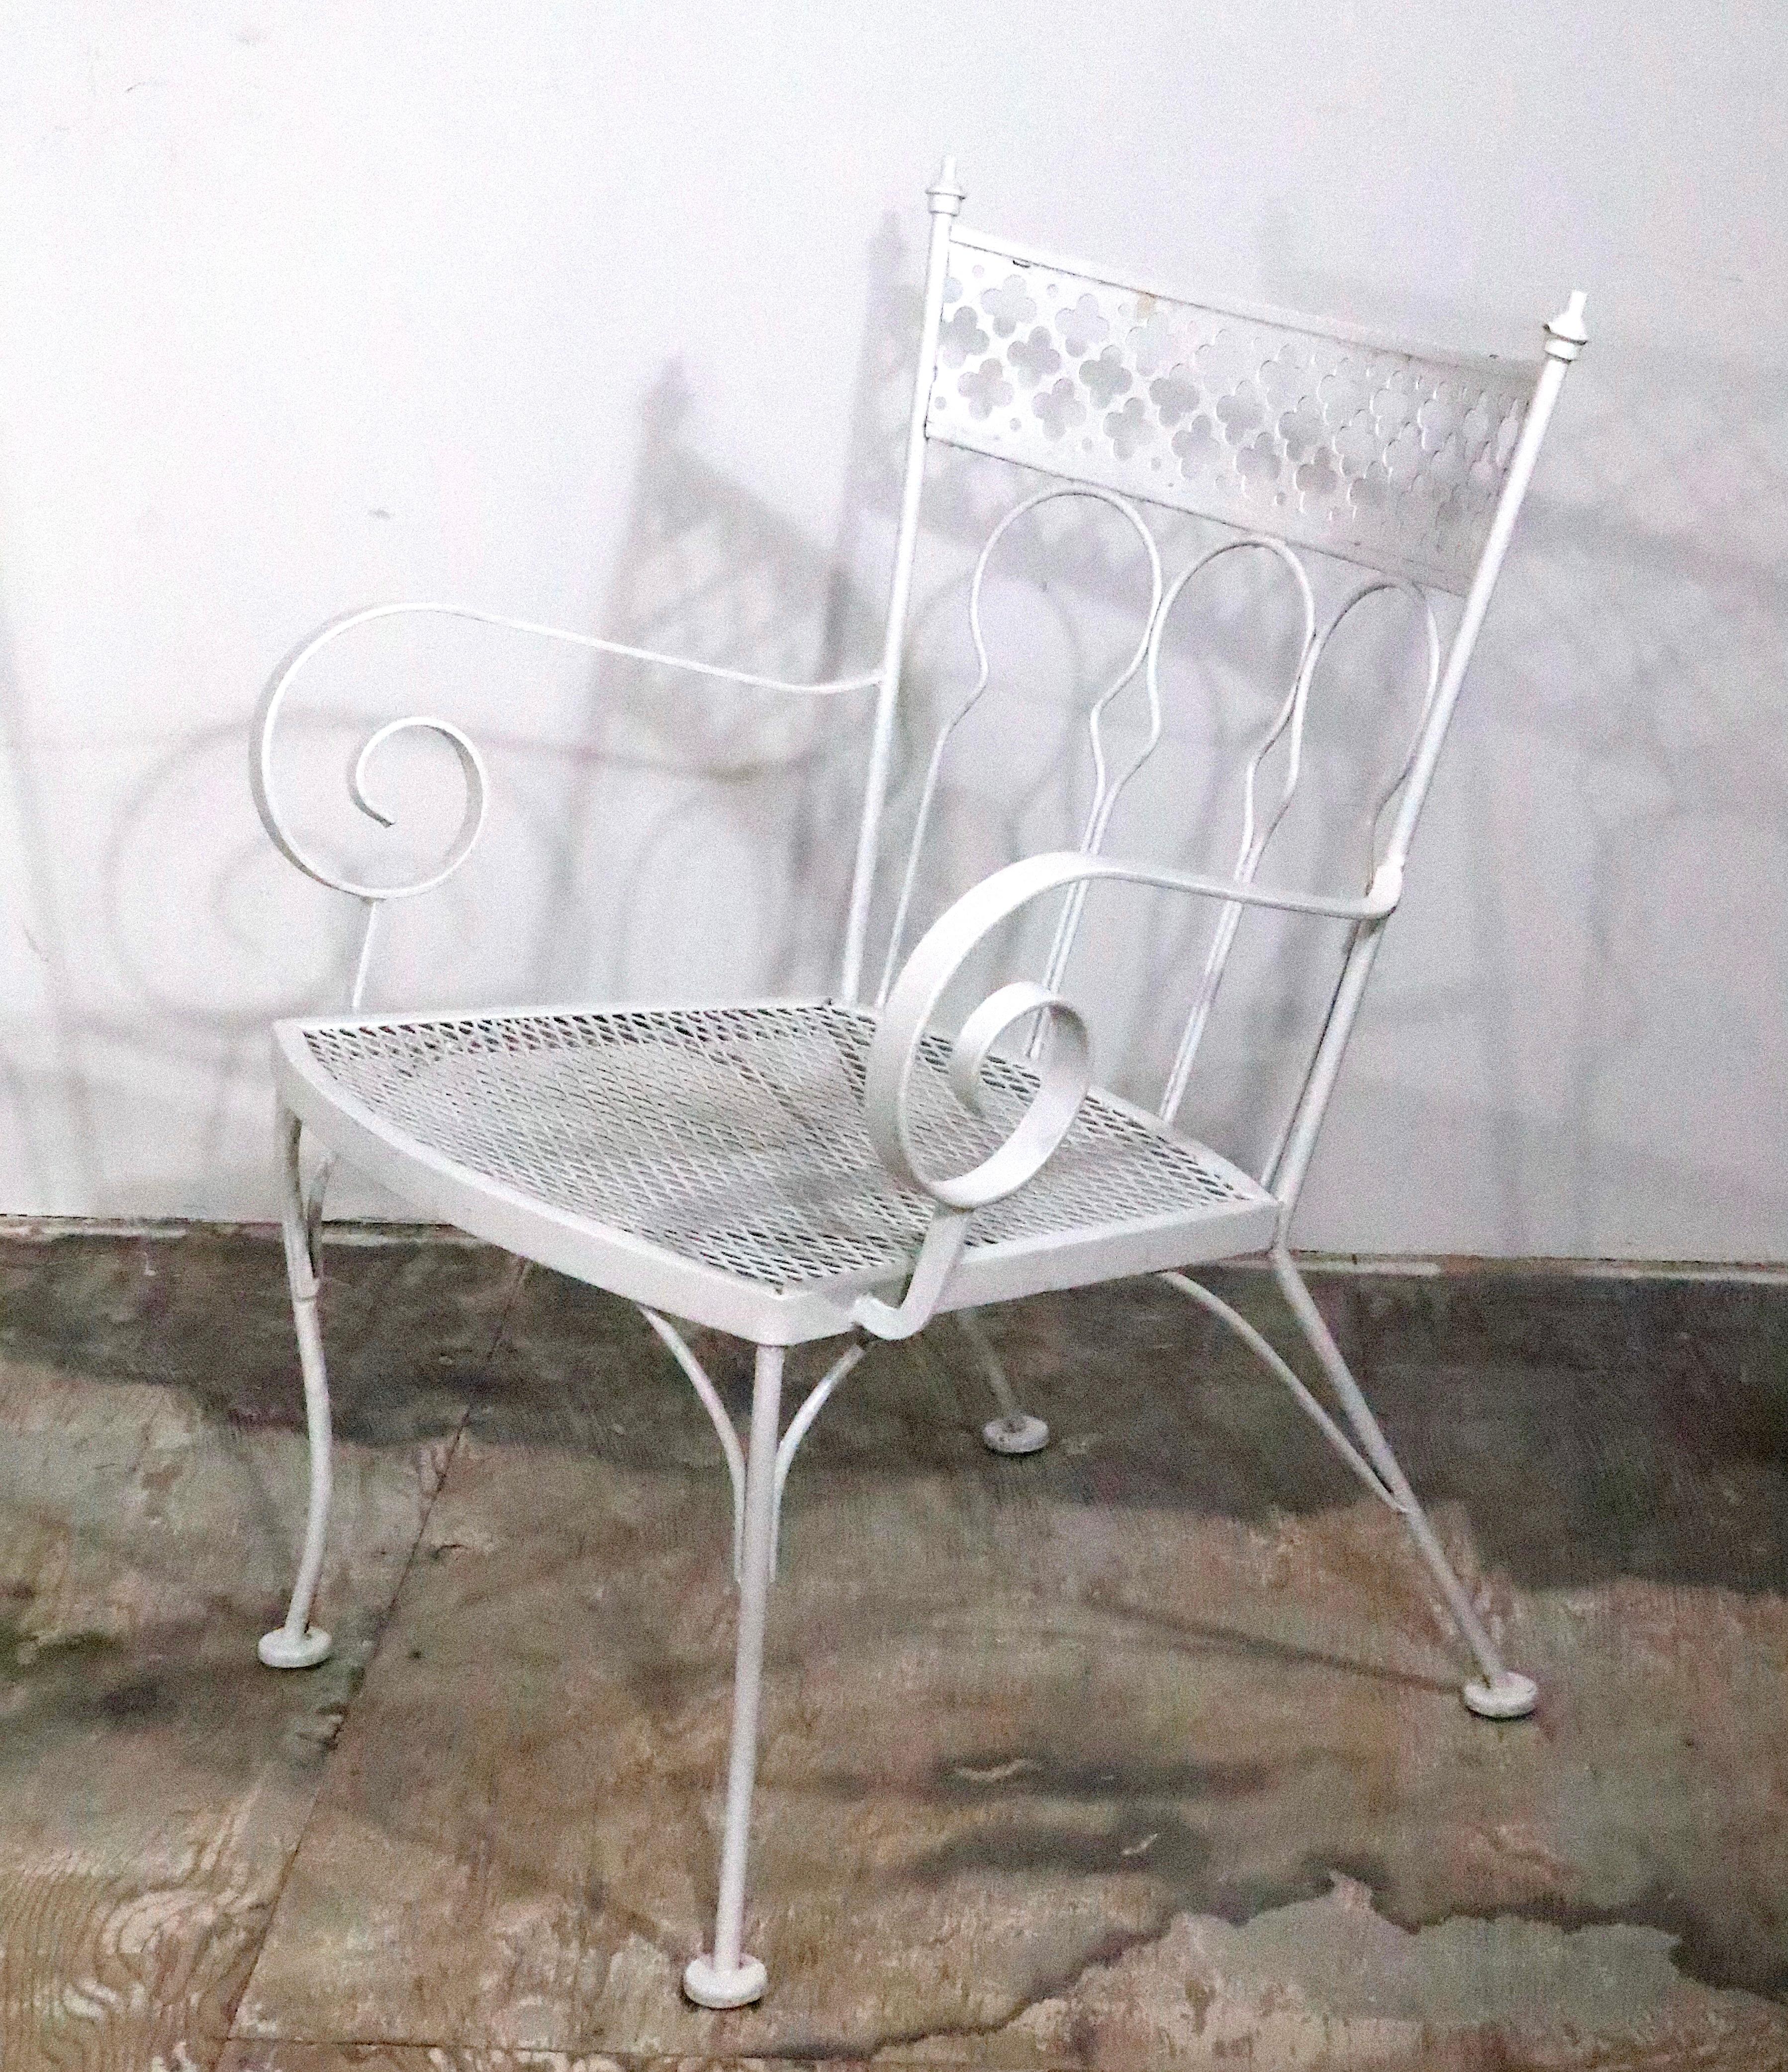 Pr. Taj Mahal Arm Chairs, by Salterini, constructed of wrought iron and metal mesh.  The chairs are in very good, original, clean and ready to use condition.
 Offered and priced as a pair, dimensions as follows:
 Total H 32.5 x Arm H 23.5 x Seat H